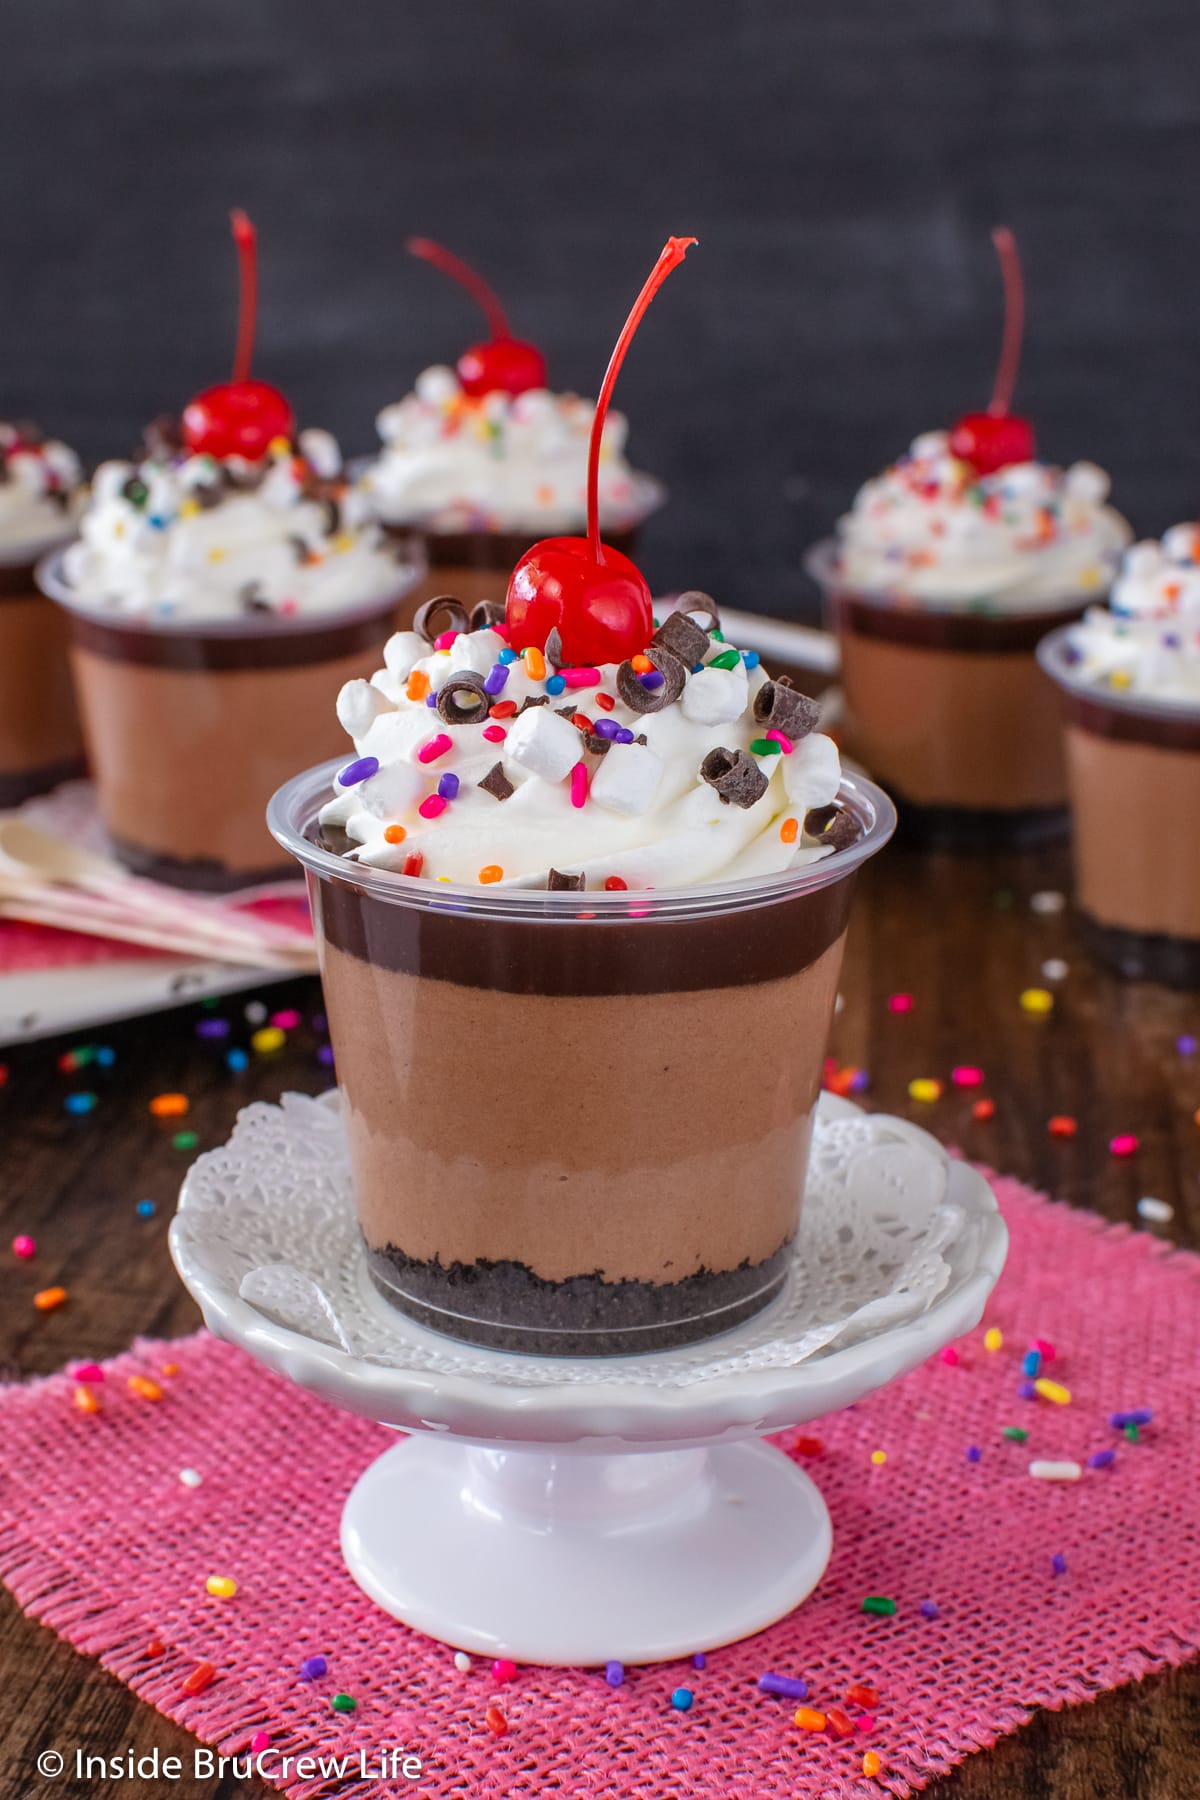 Chocolate mousse layered in little plastic cups.